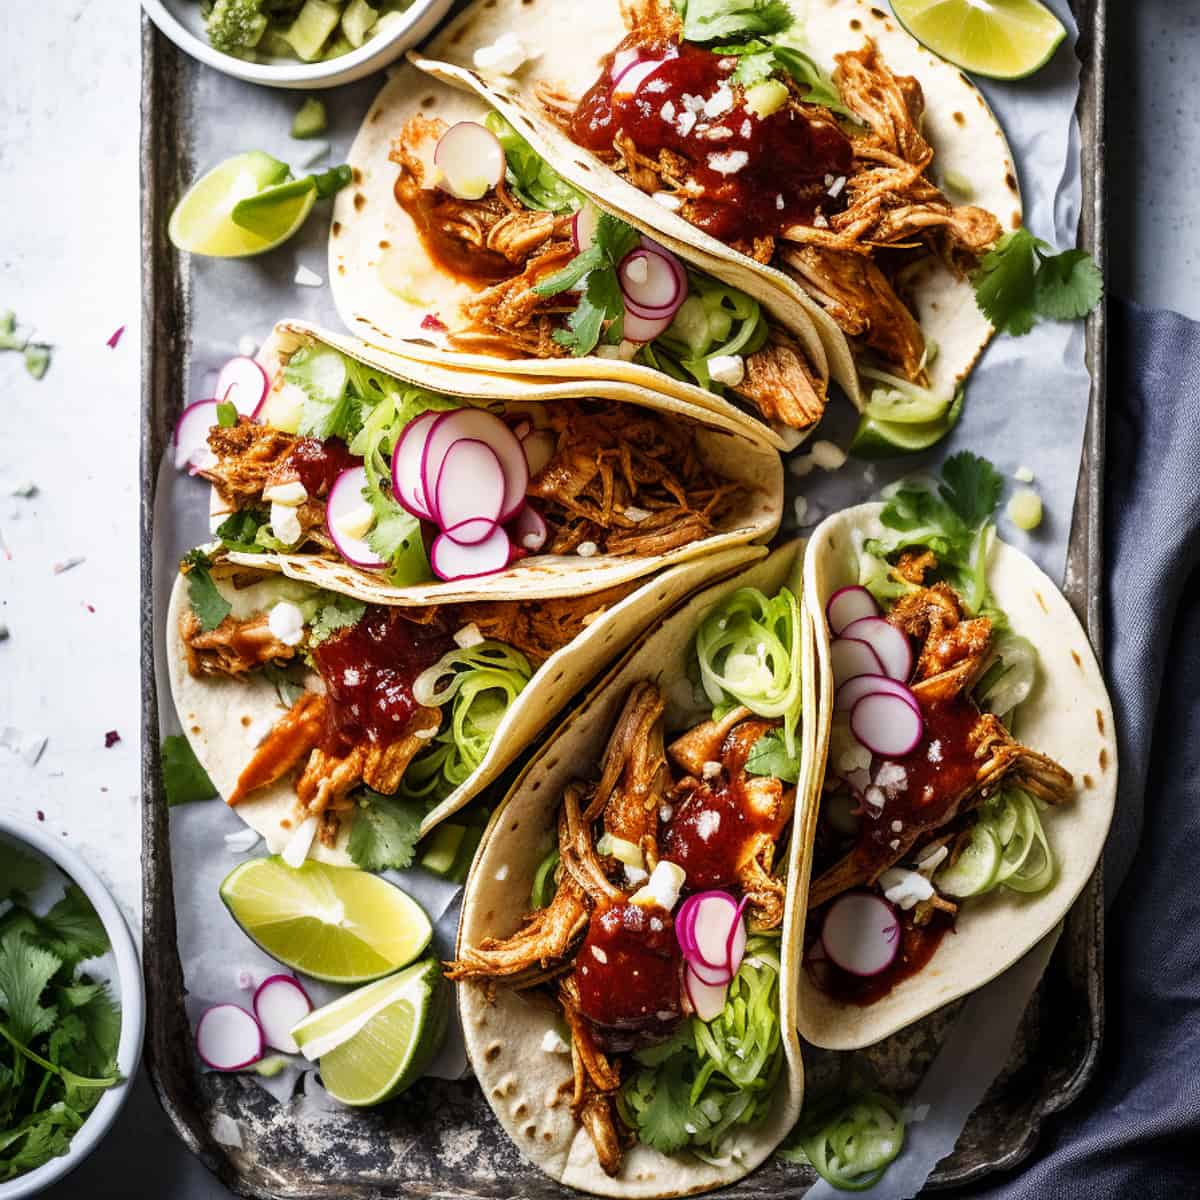 Chicken tacos with BBQ sauce.